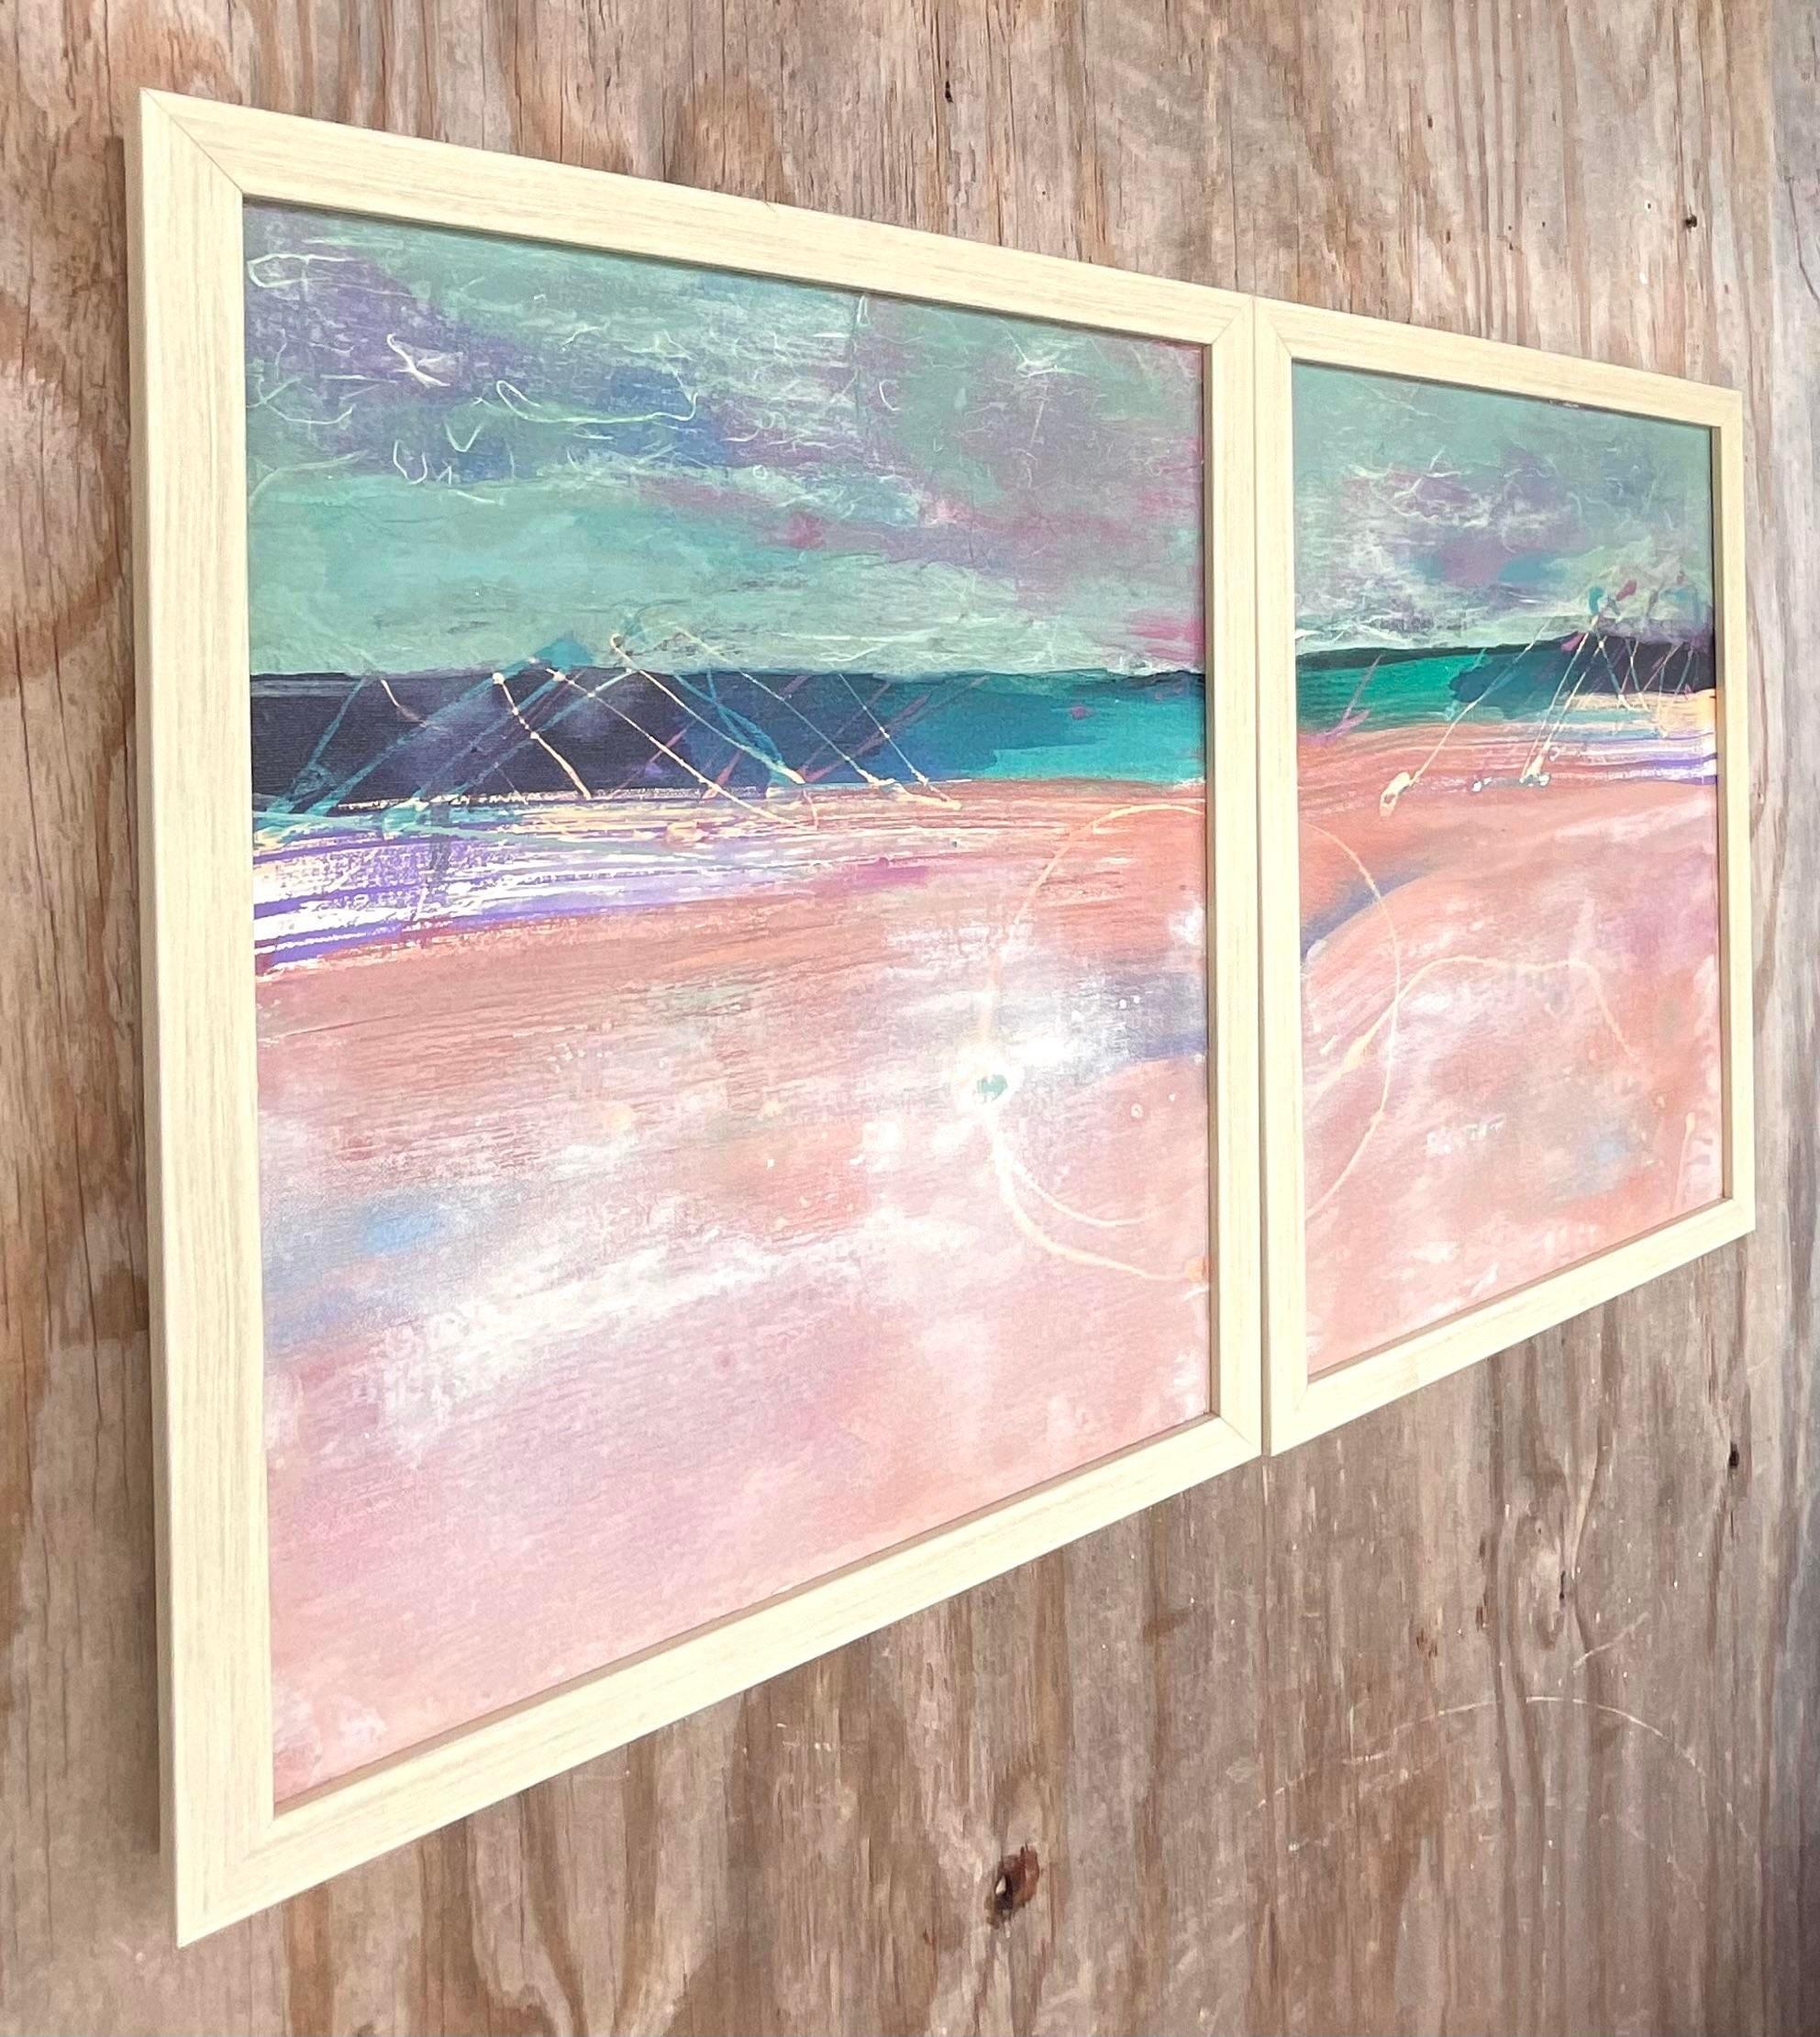 Vintage Contemporary Original Abstract Oil Paintings on Canvas - Set of 2 In Good Condition For Sale In west palm beach, FL